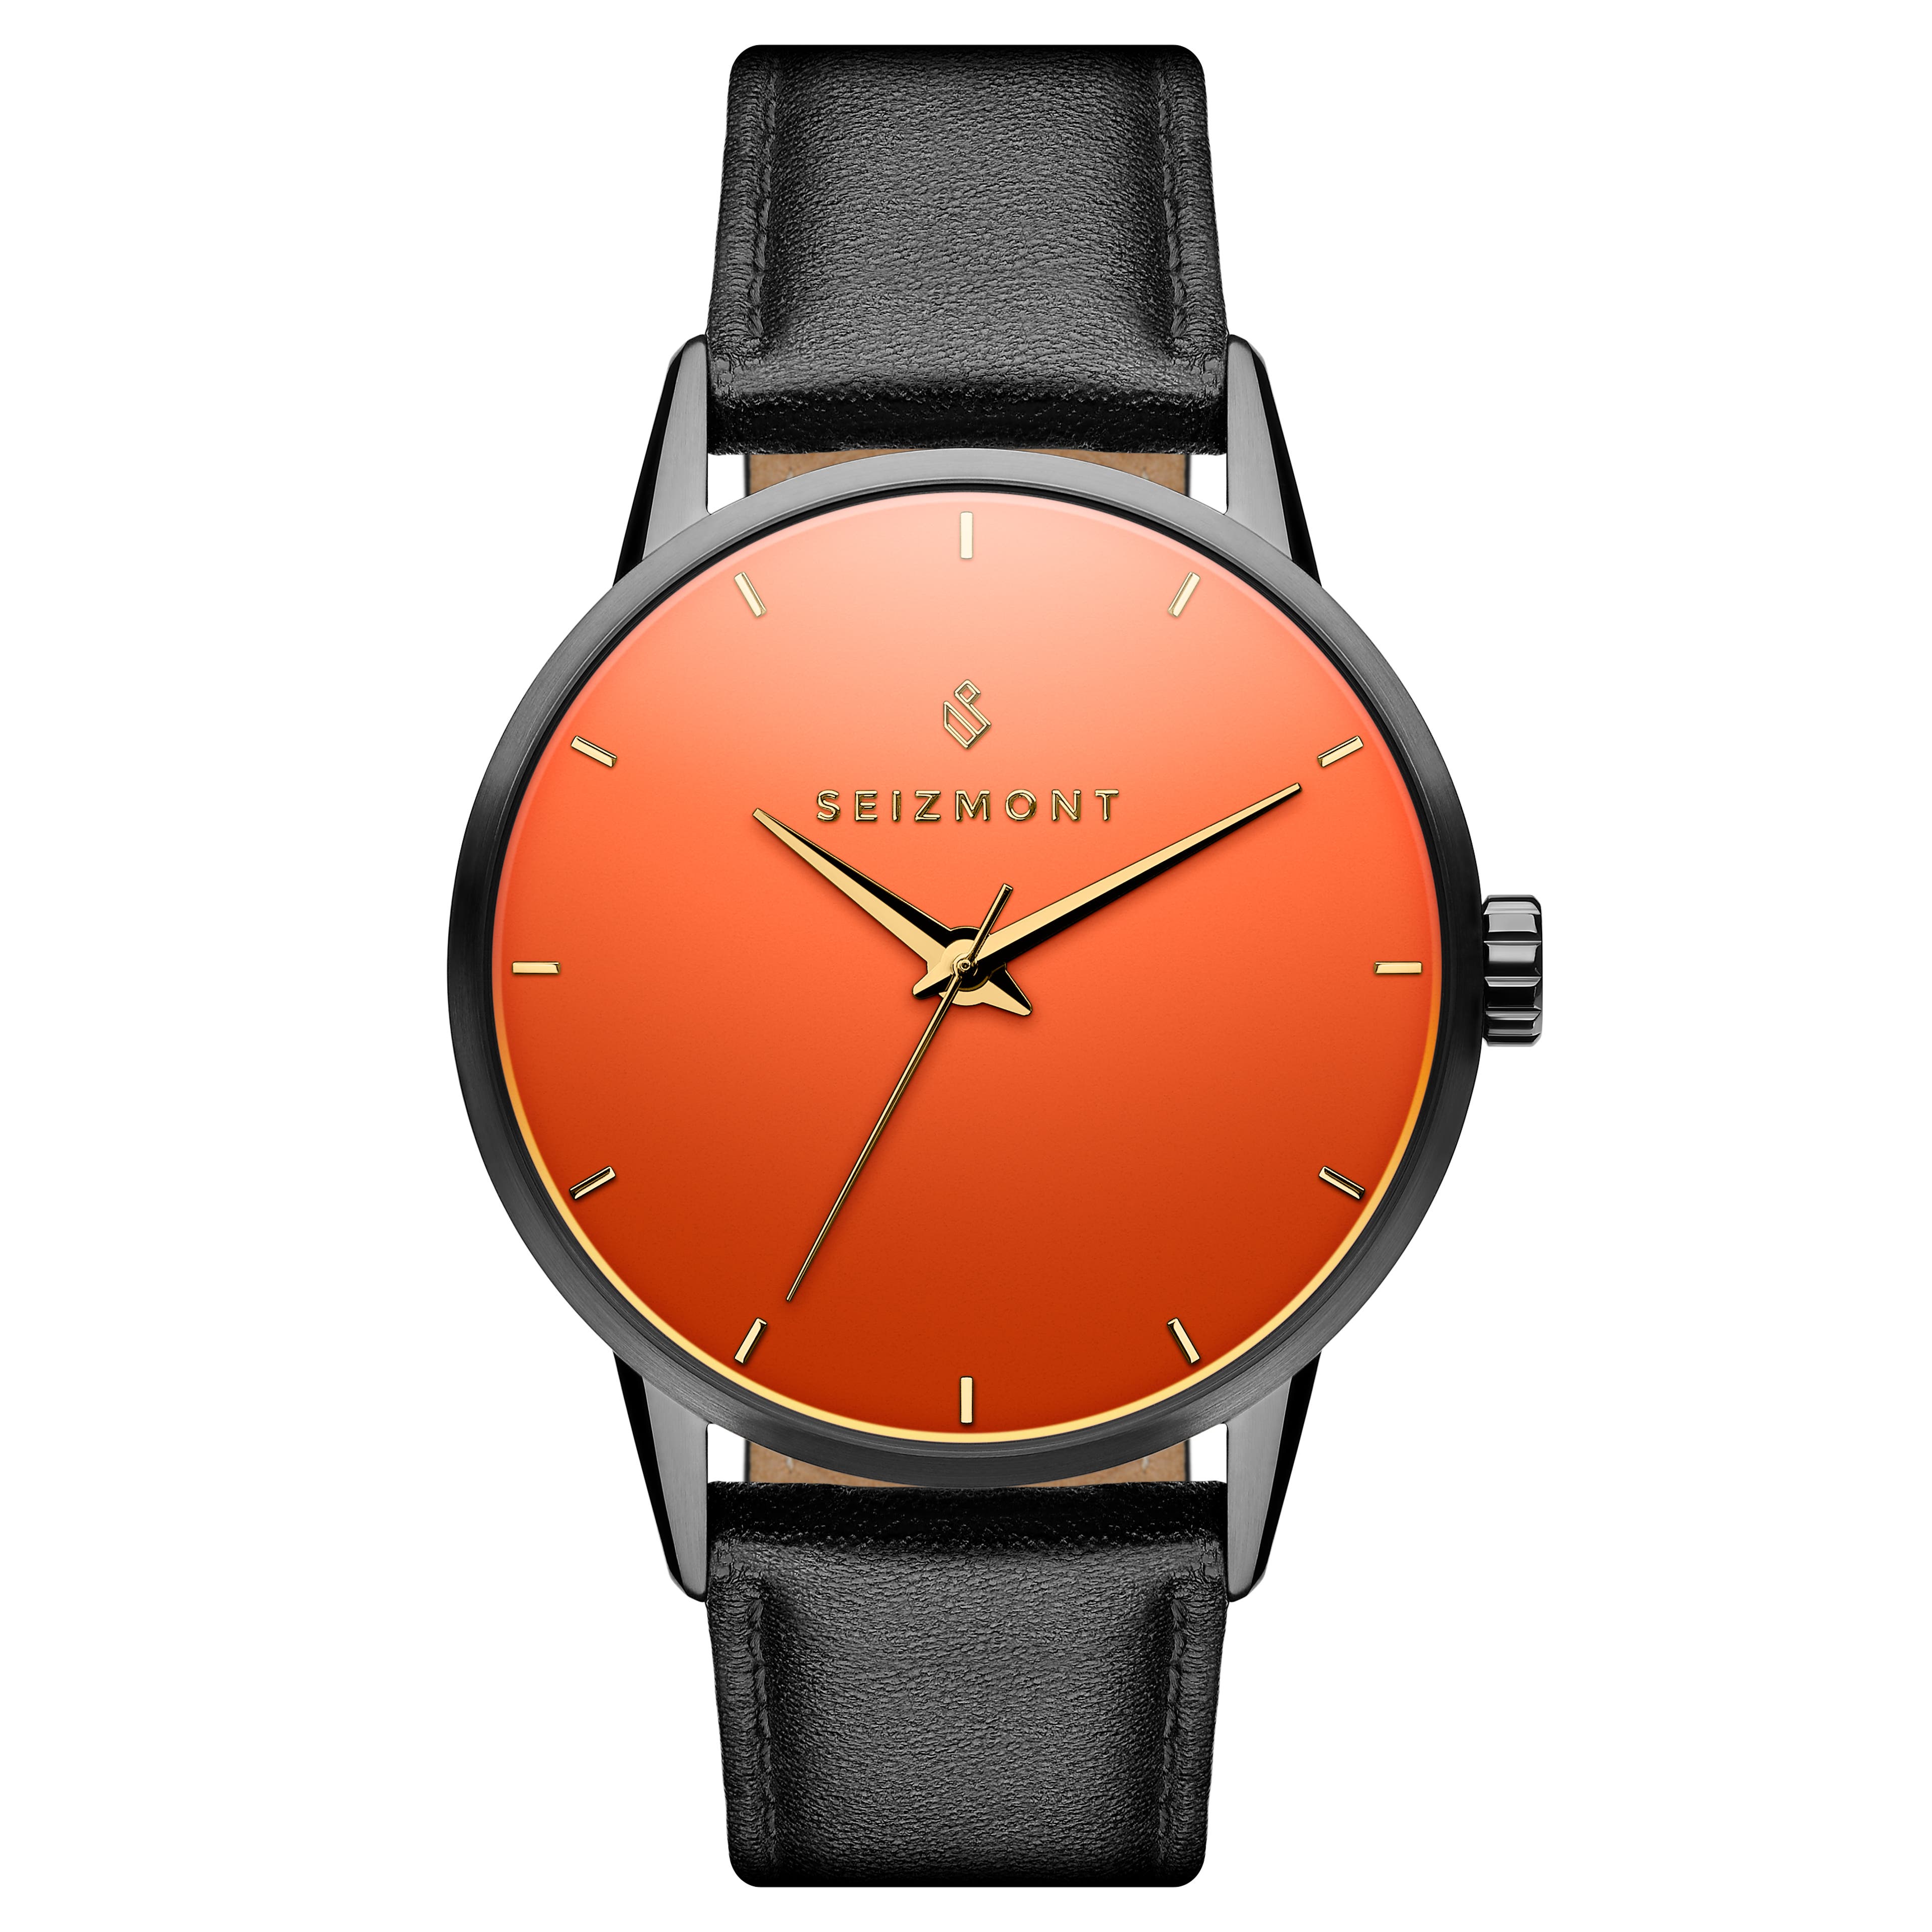 Onknown | Red Tinted Mirror Glass Leather Watch